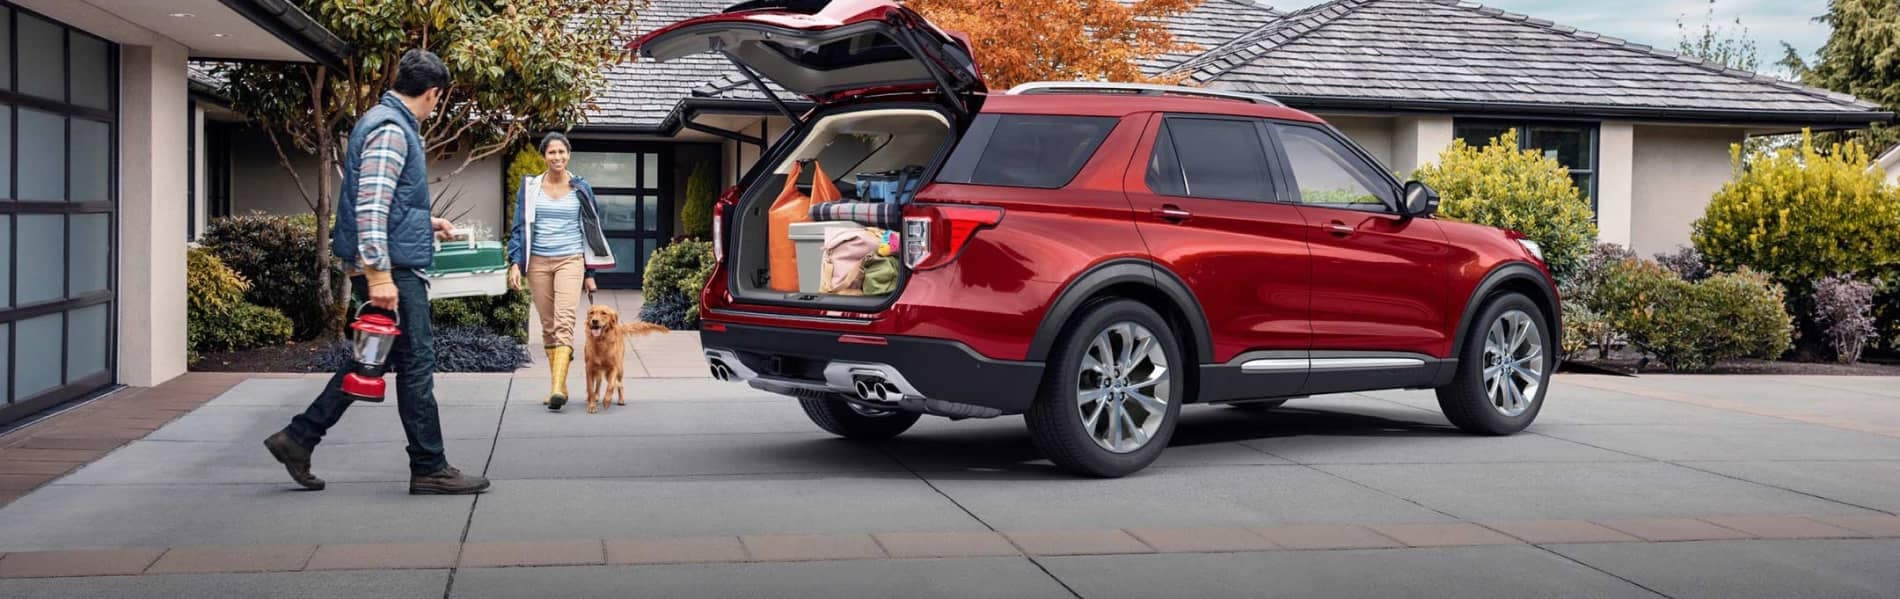 Red Ford SUV with a family packing up the tailgate